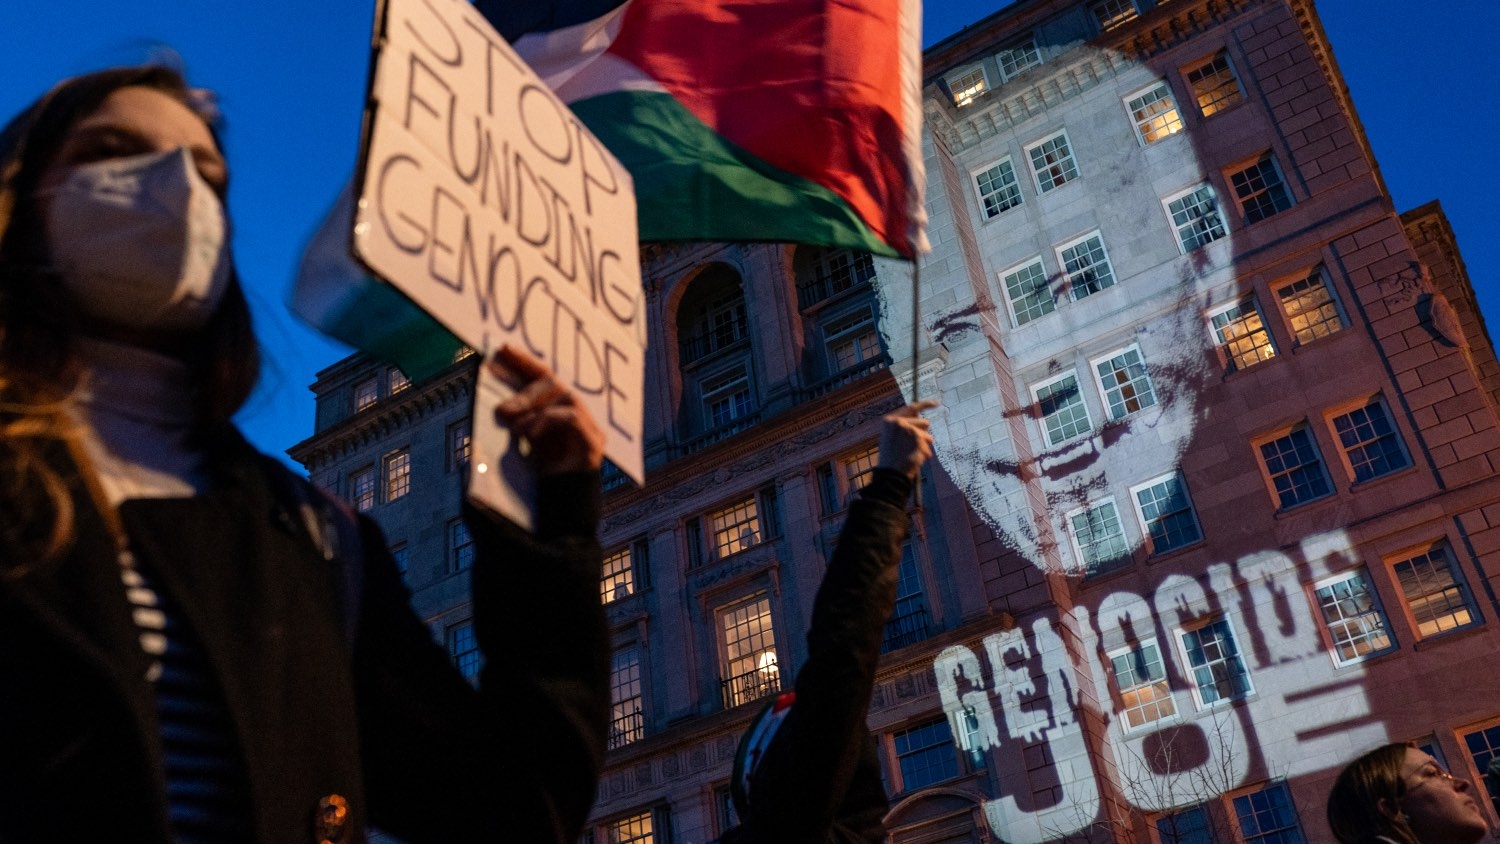 An image of President Joe Biden is projected on to a building during a Pro-Palestinian protest near the White House on 7 March 2024 in Washington DC.